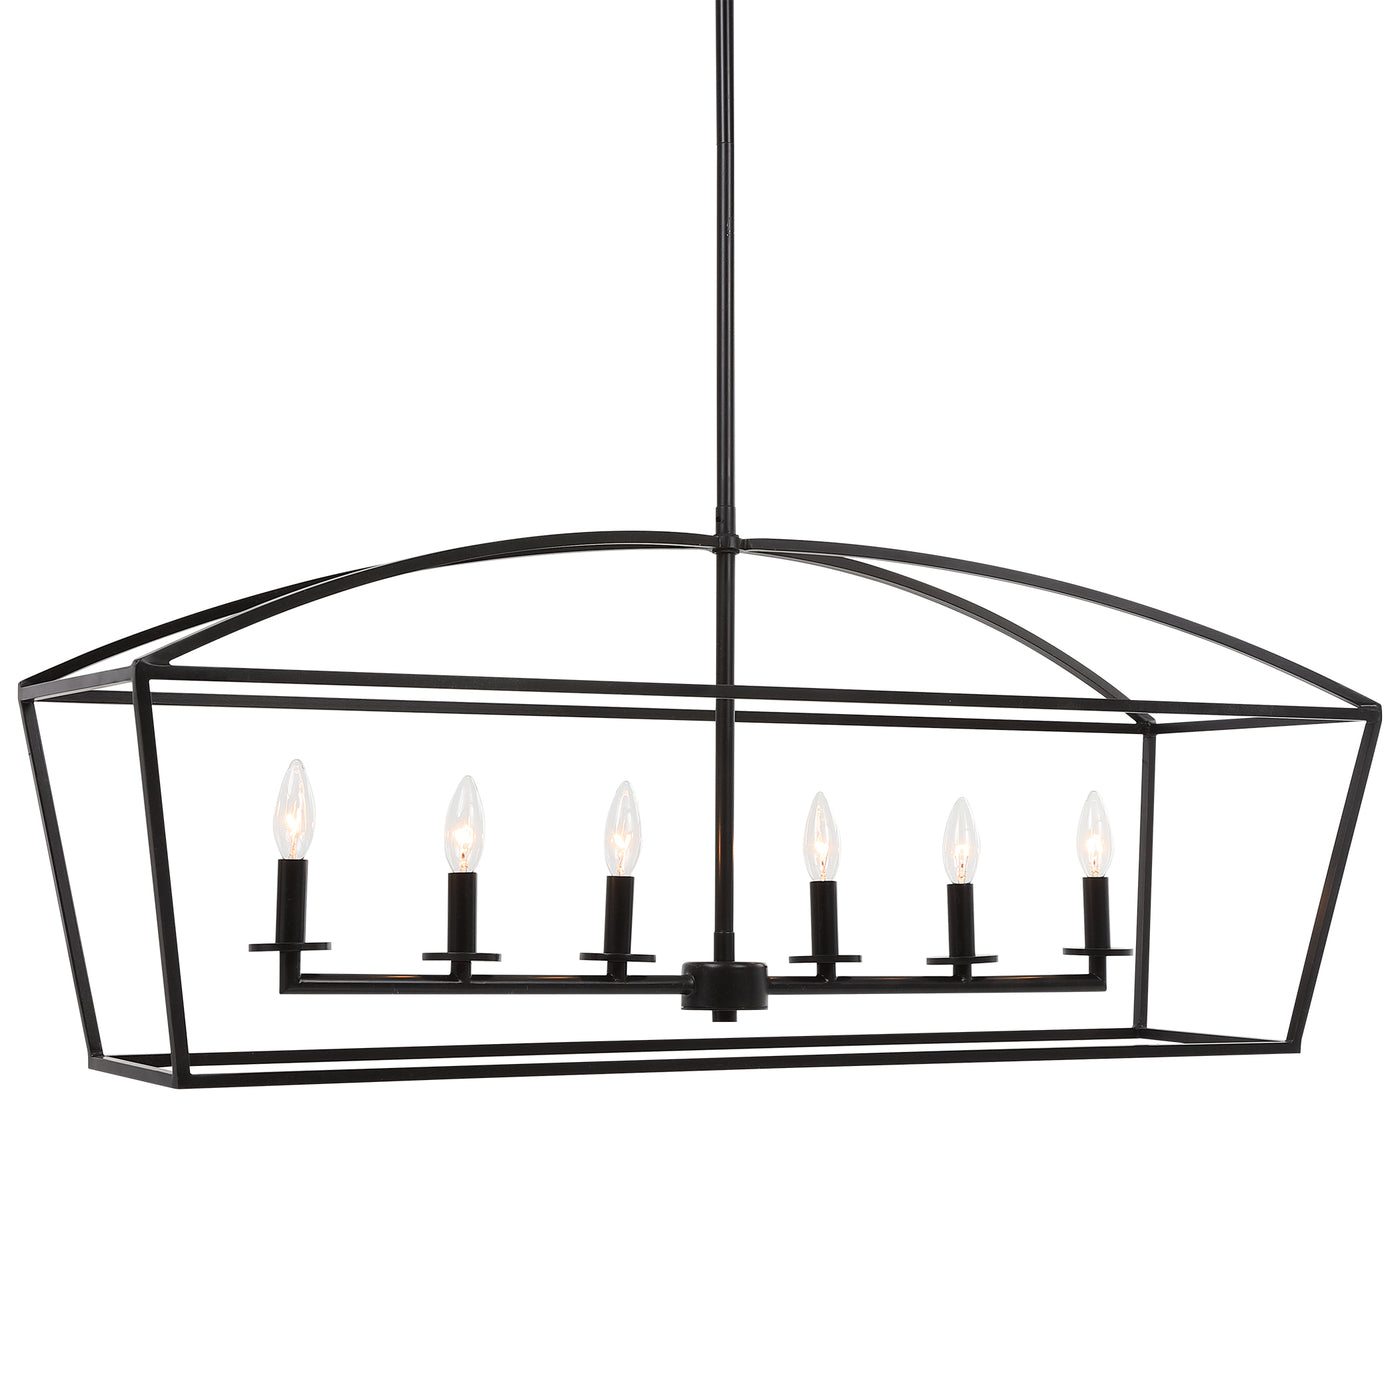 Simple Clean Open Frame Lines Are The Focus Of This Vintage Farm Industrial 6 Lt.  Linear Chandelier. The Deep Dark Weathe...